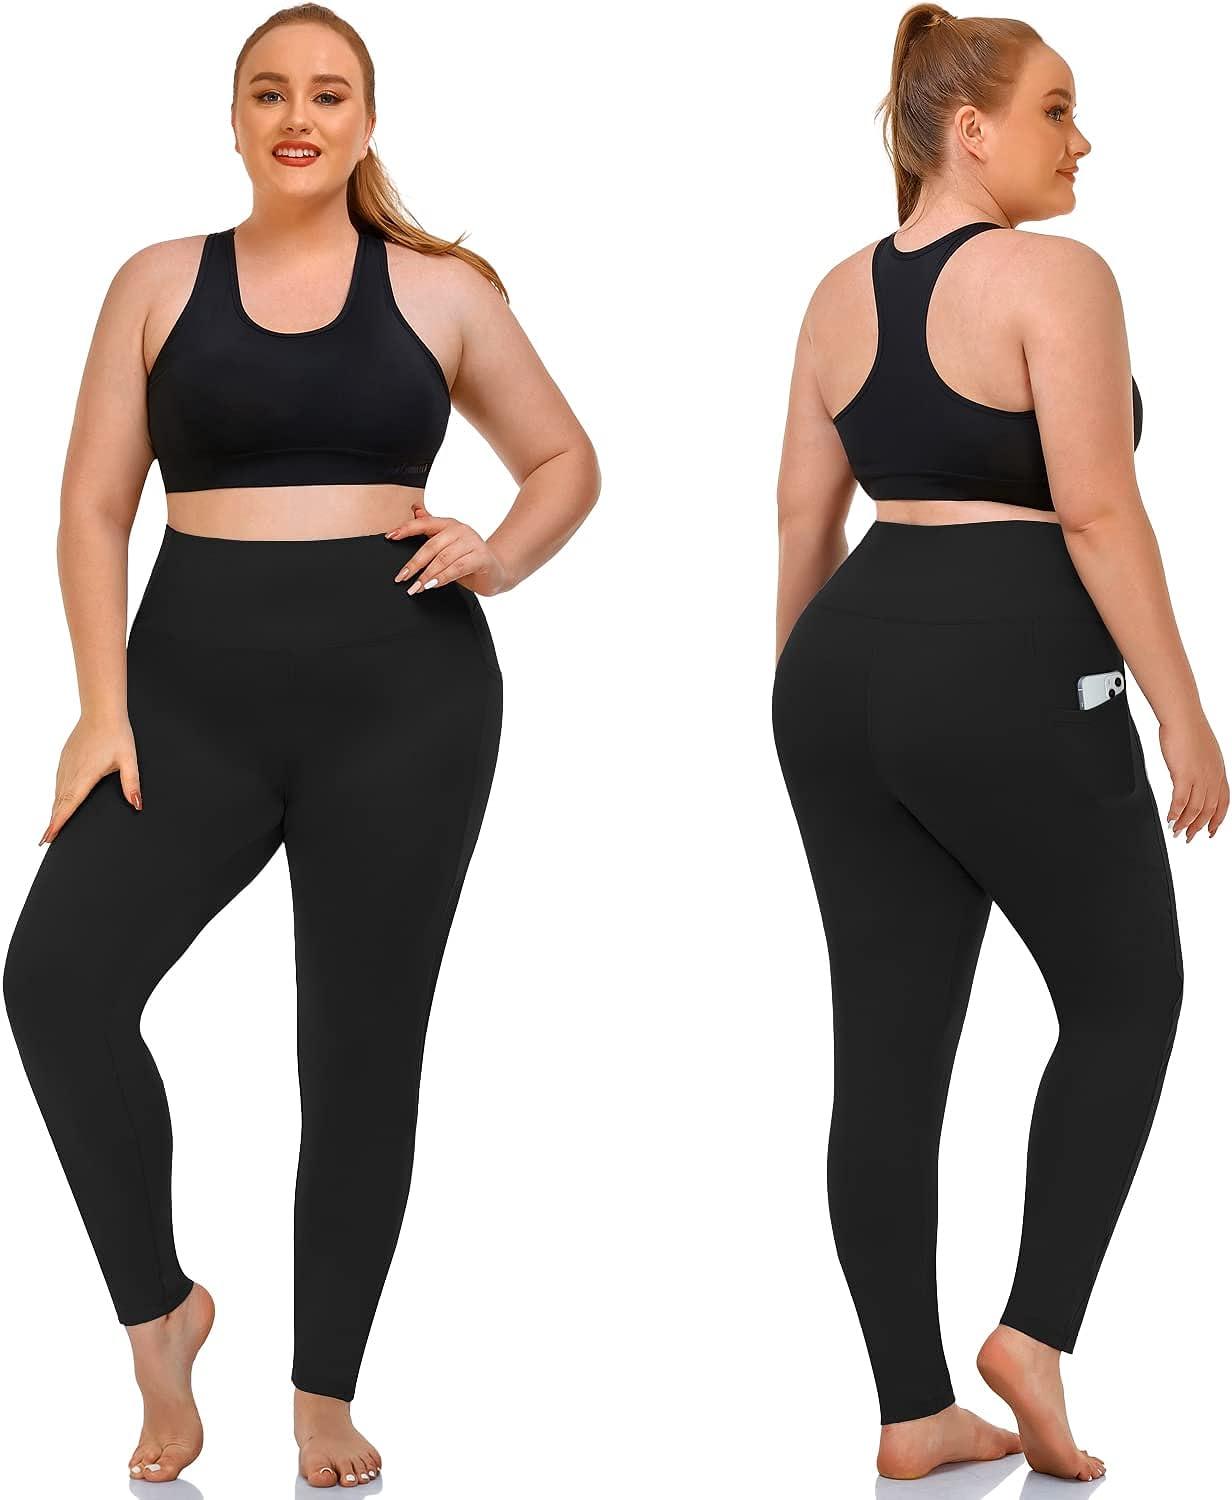  NEW YOUNG 3 Pack Leggings with Pockets for Women,High